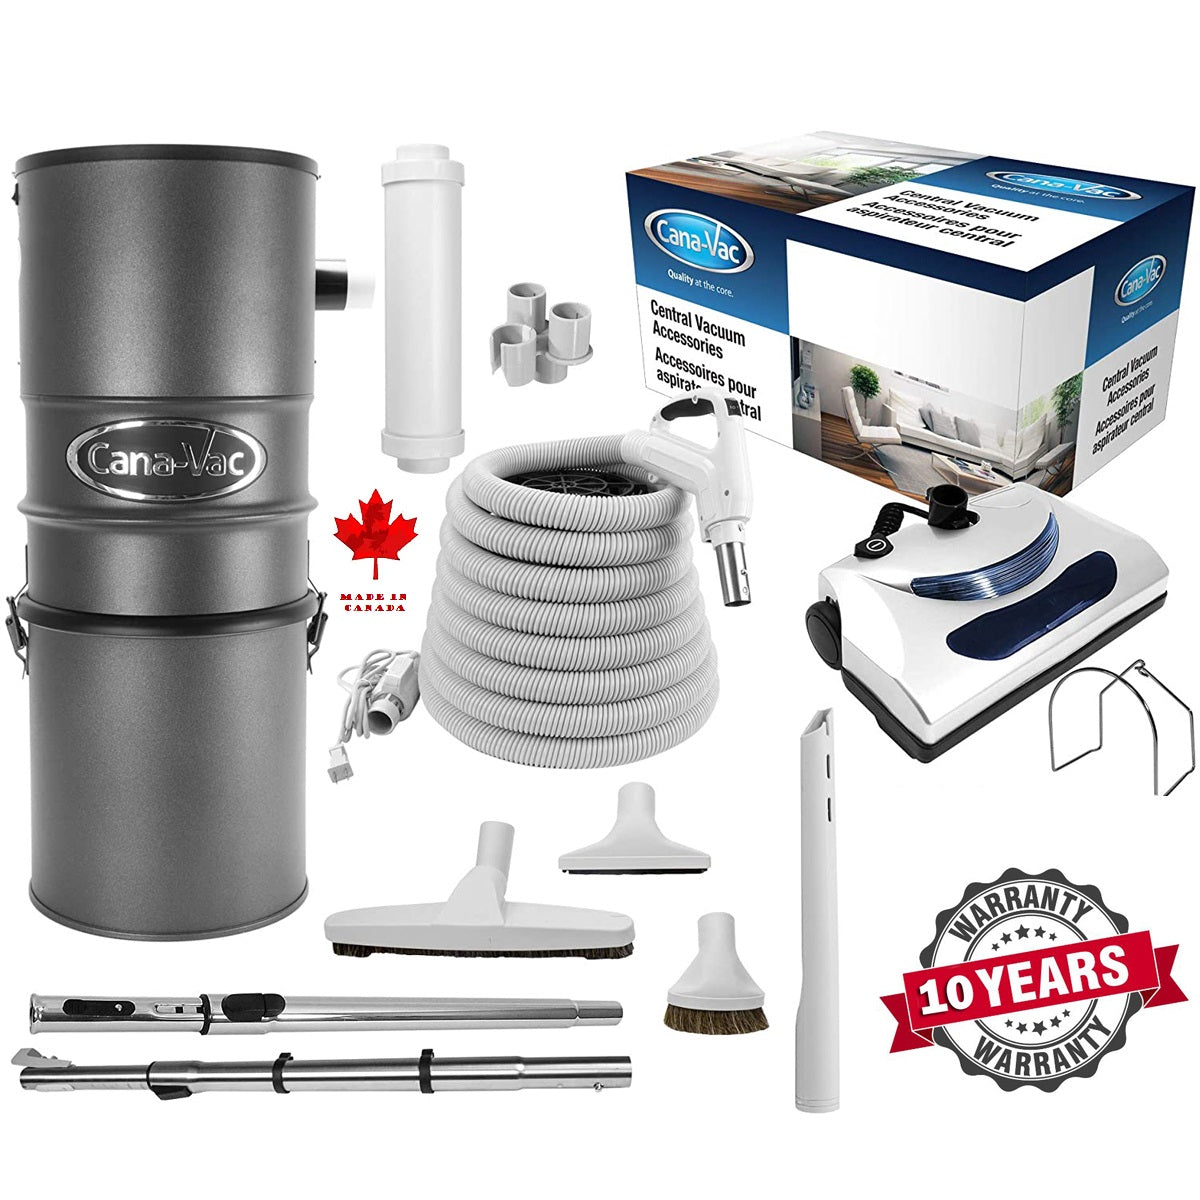 CanaVac Ethos CV700SP Compact Central Vacuum Cleaner With Deluxe Electric Package - 700AW for homes up to 8,000 Sq.F. - Super Vacs